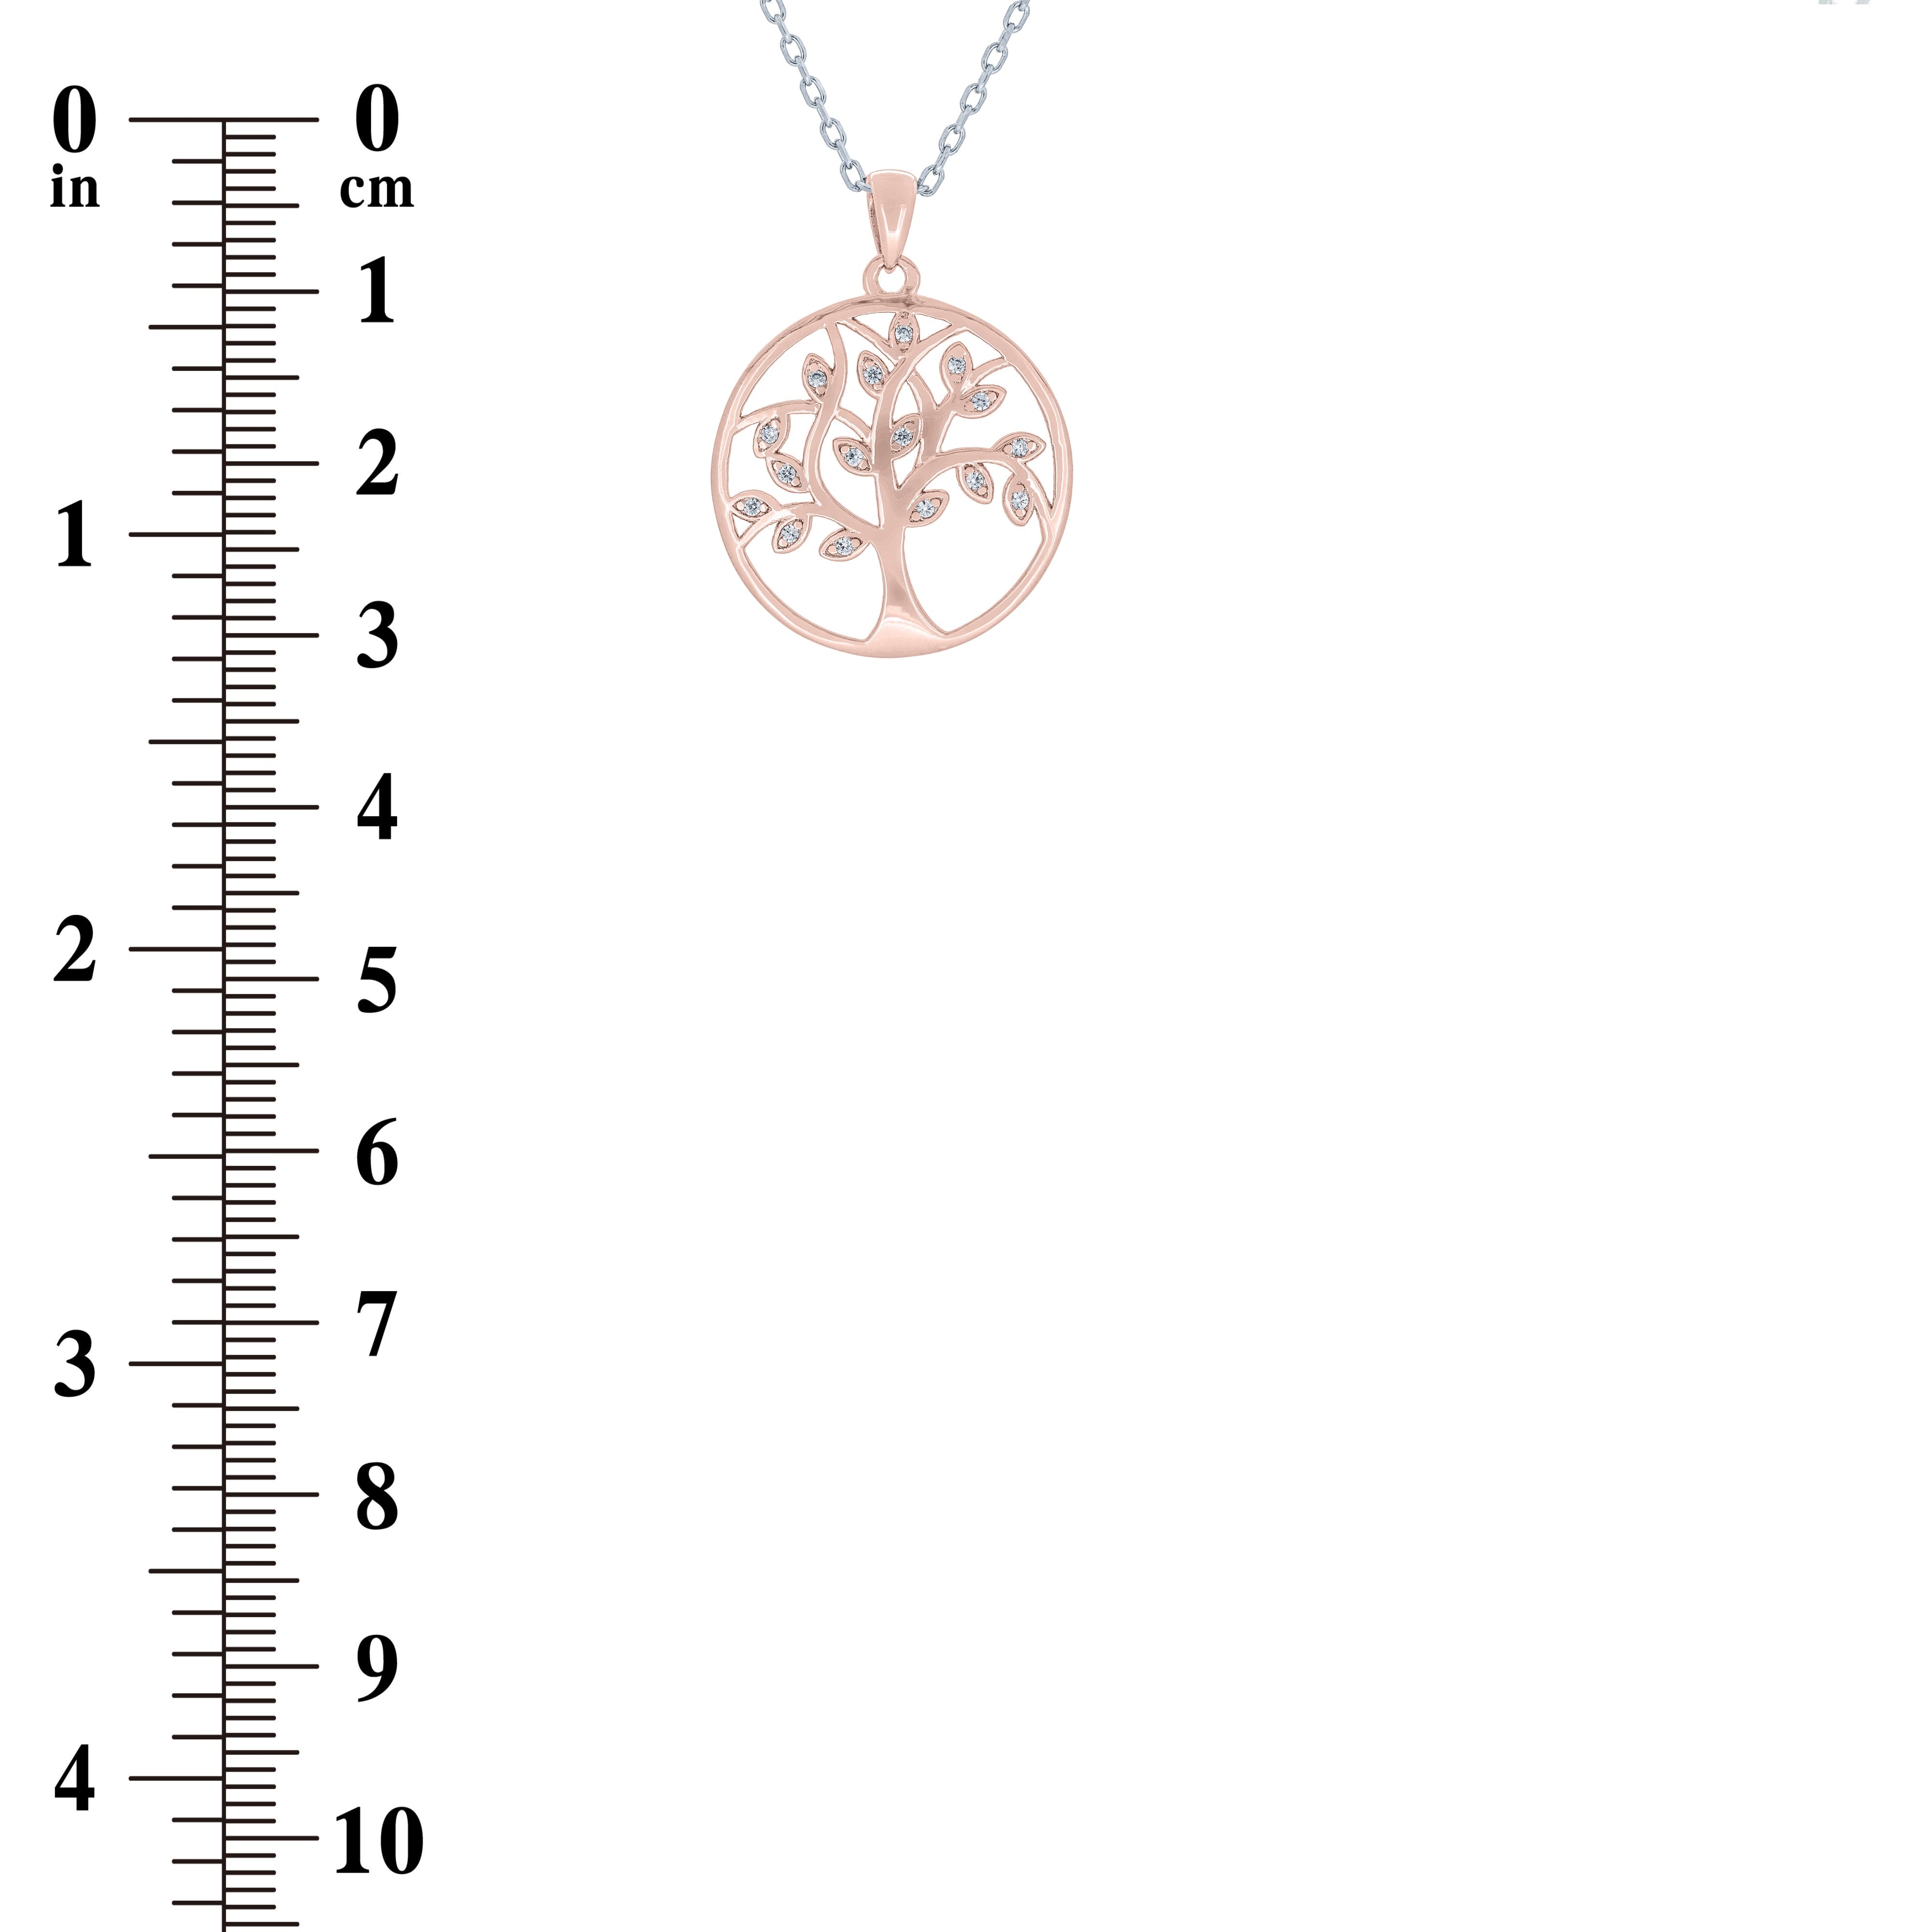 (100117A) White Cubic Zirconia Tree Of Life Pendant Necklace In Sterling Silver and Rose Gold Plate